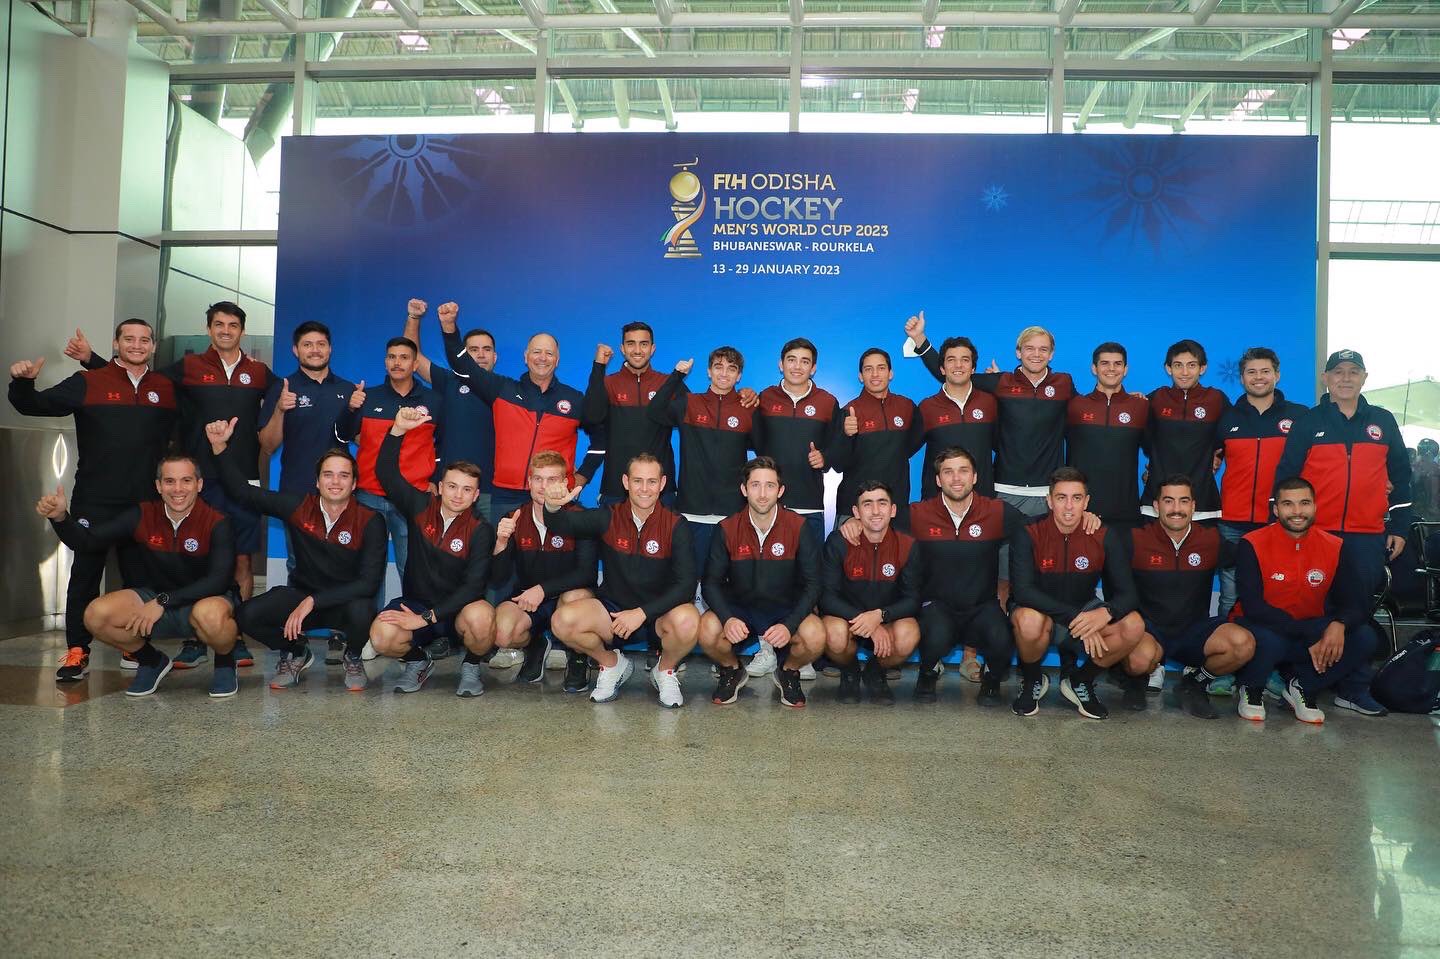 Chile Men’s Hockey Team reached Odisha on Thursday for the tournament and received a warm welcome at the Biju Patnaik International Airport in Bhubaneswar.